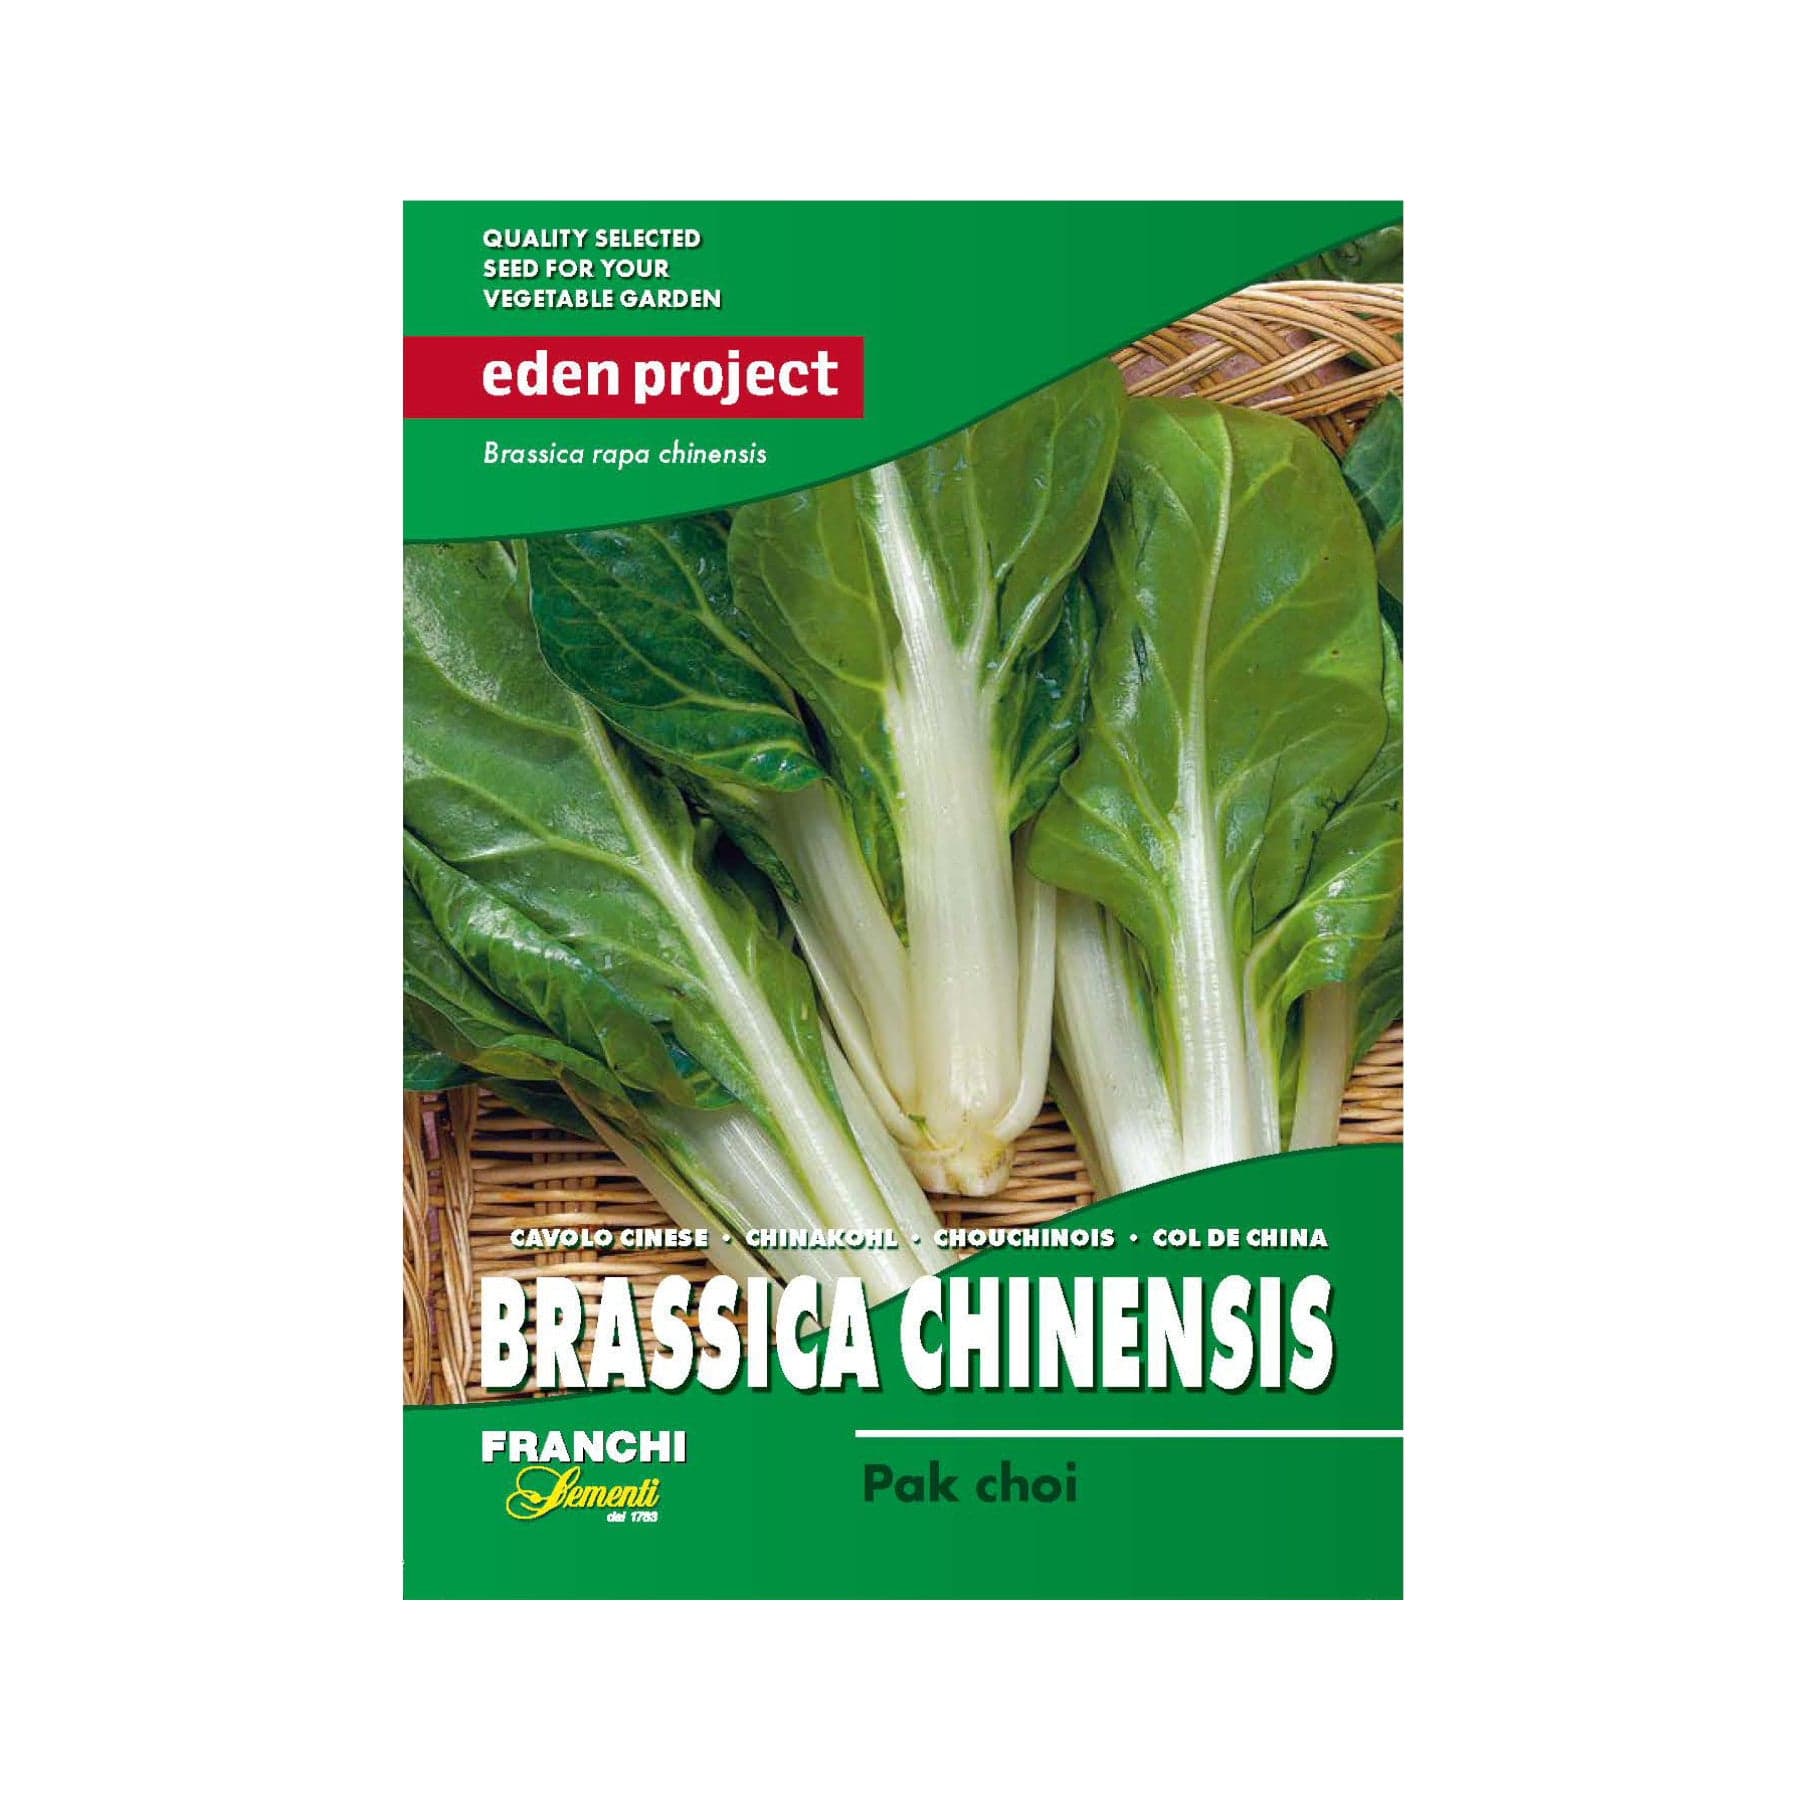 Eden Project quality vegetable seeds packaging for Brassica rapa chinensis, commonly known as Pak choi or Bok choy, displayed on wicker surface.